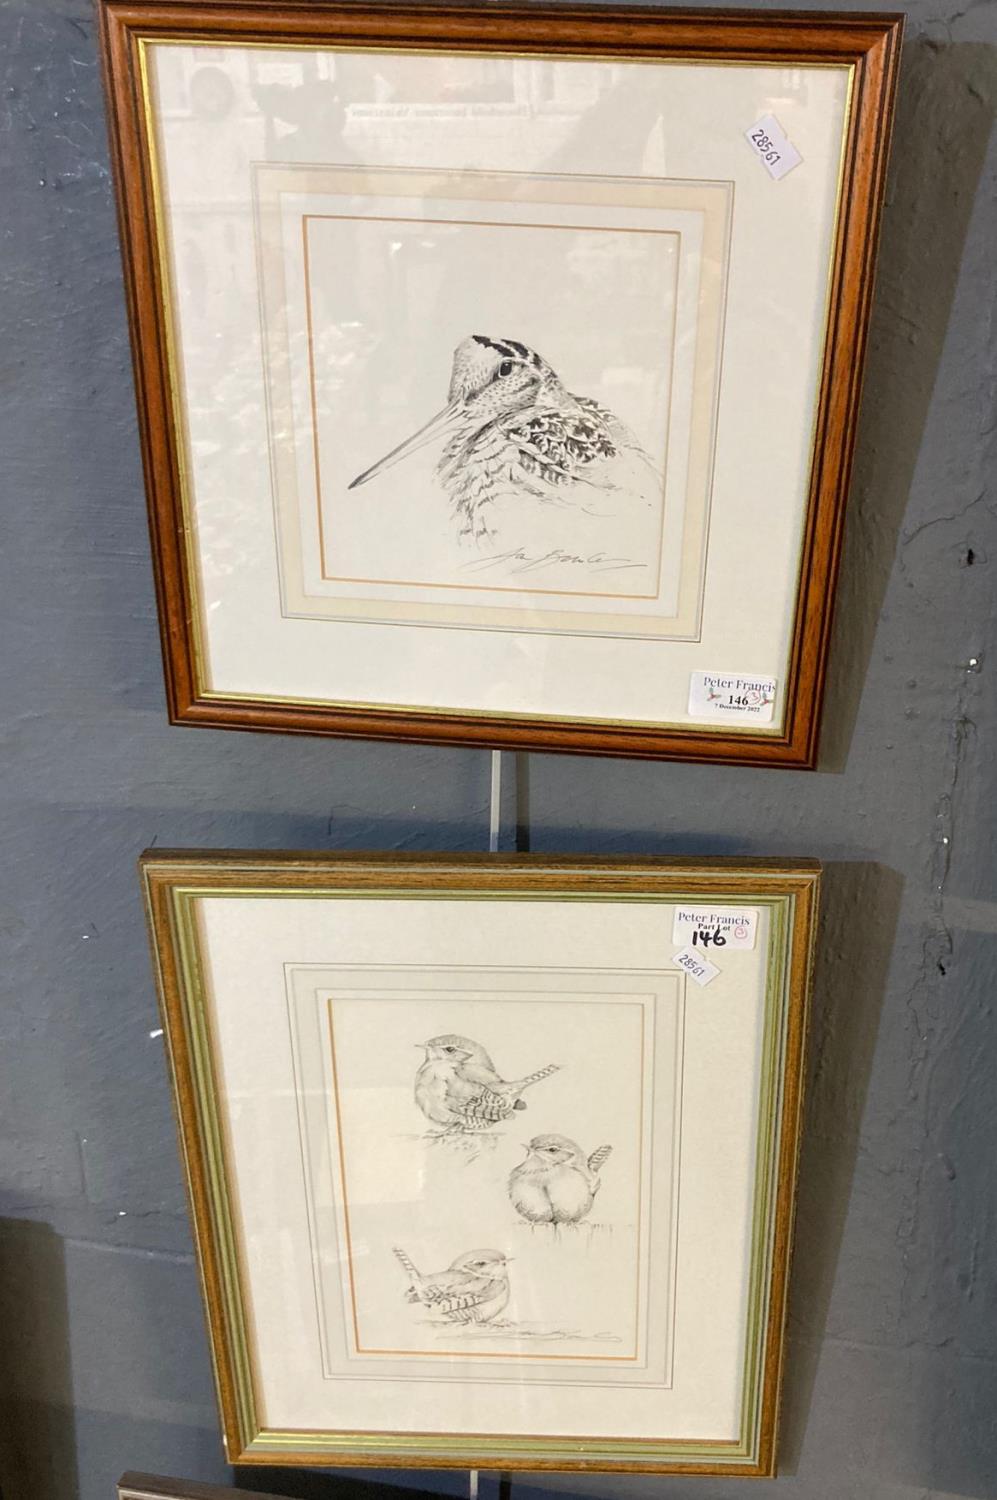 Ian Bowles, Bird studies,two , woodcock and young wrens, signed, pencil sketches. 16 x 15cm and 22 x